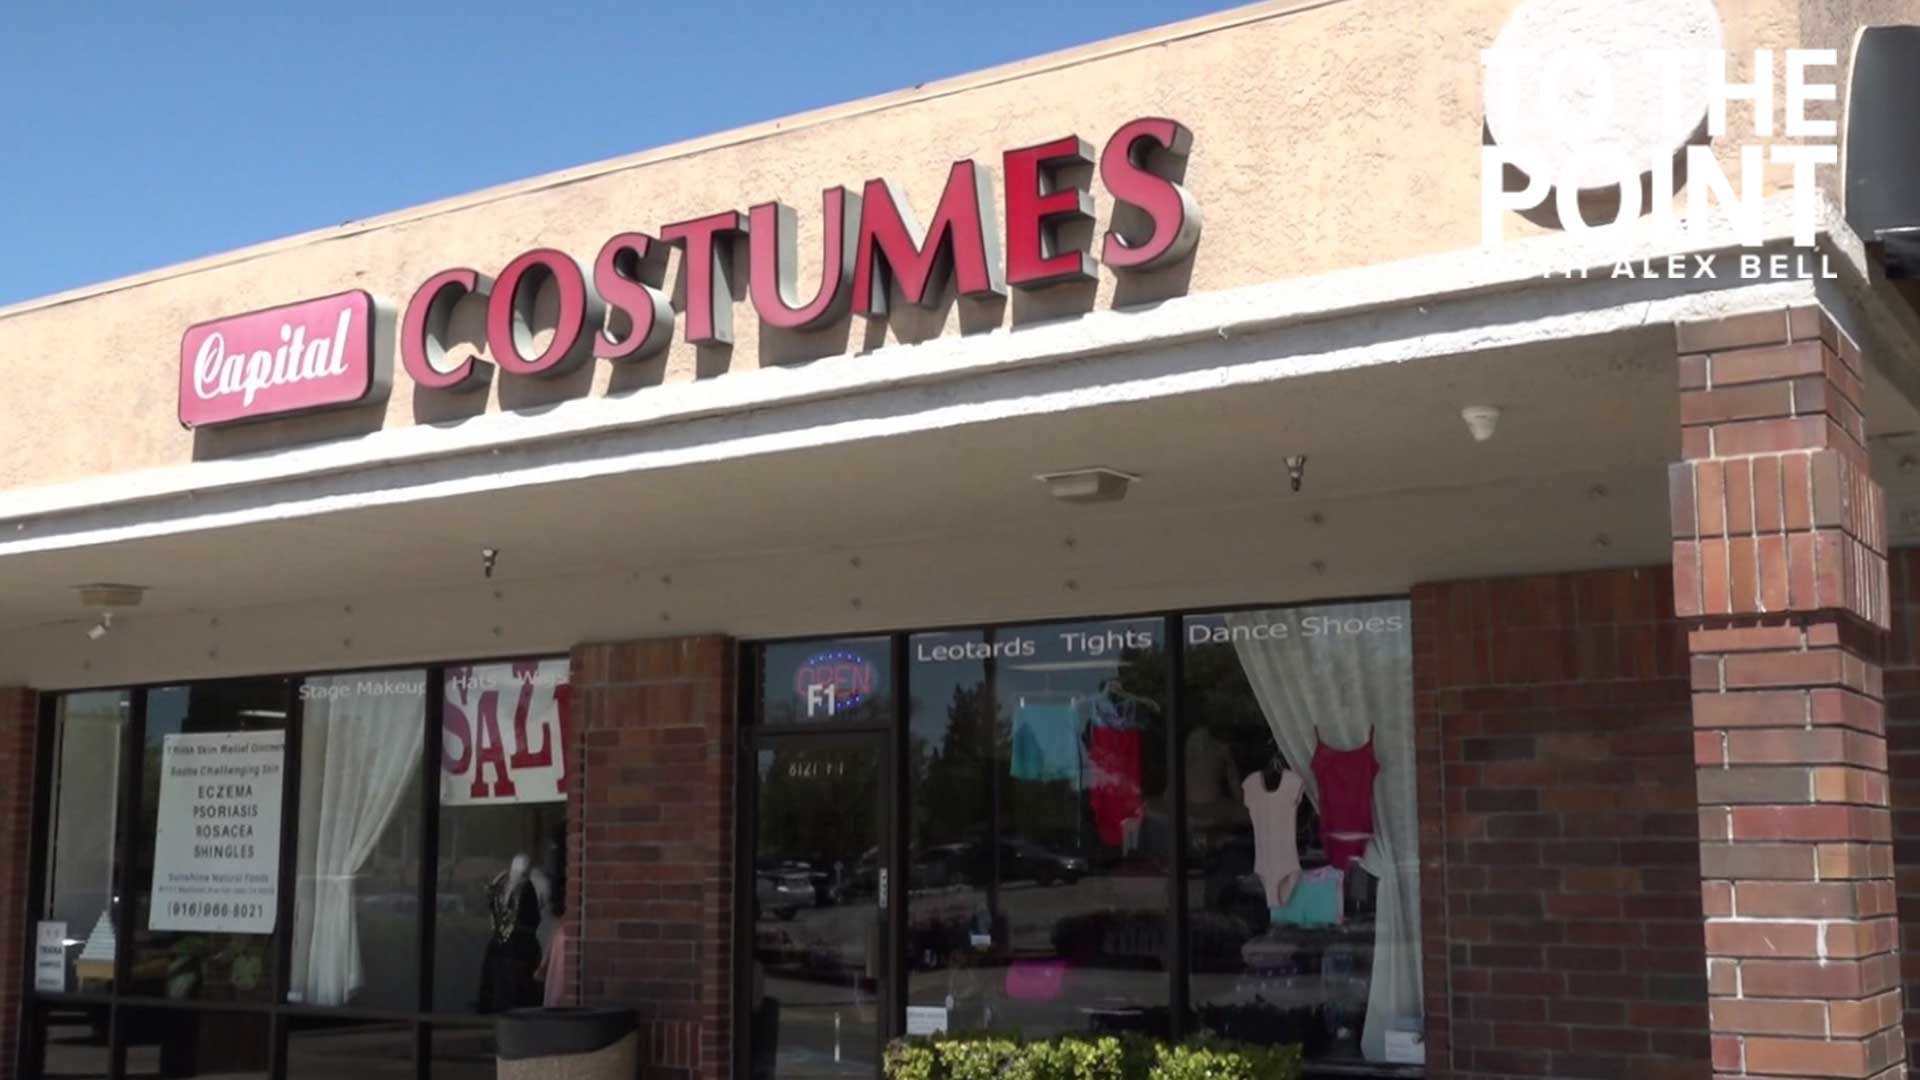 Sacramento staple Capital Costumes Inc. to close after being open since 1910